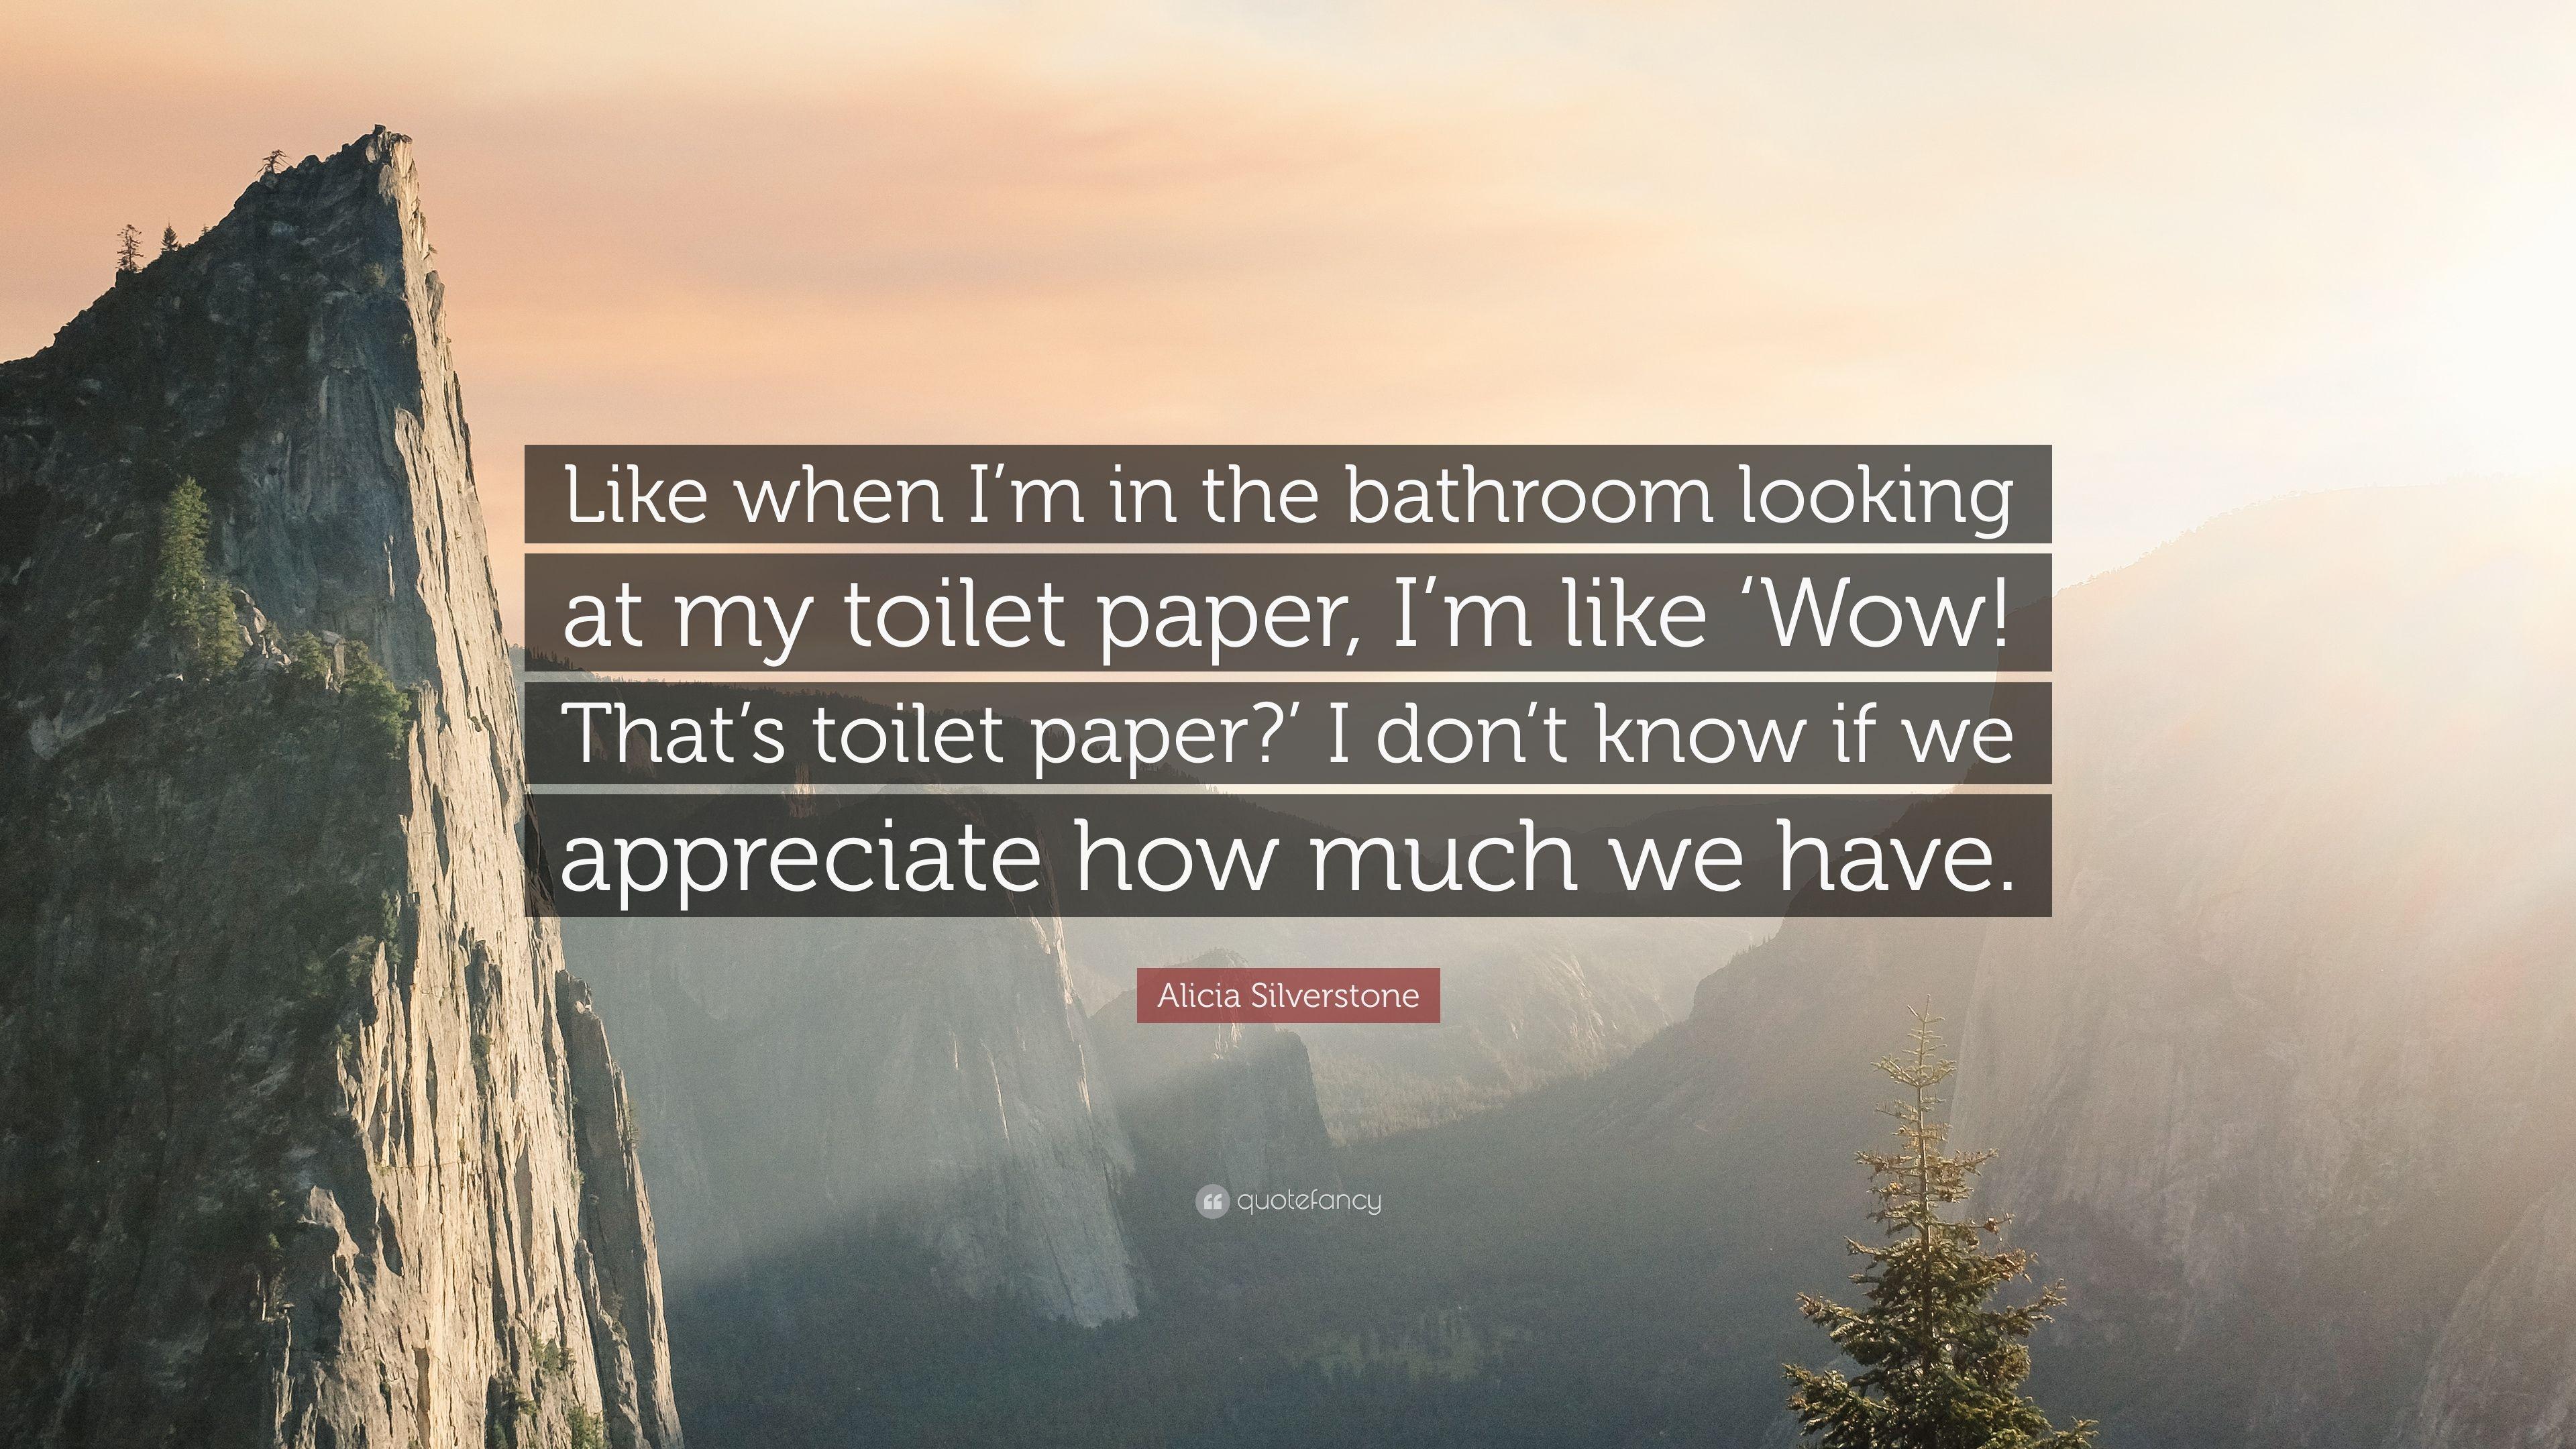 Alicia Silverstone Quote: “Like when I'm in the bathroom looking at